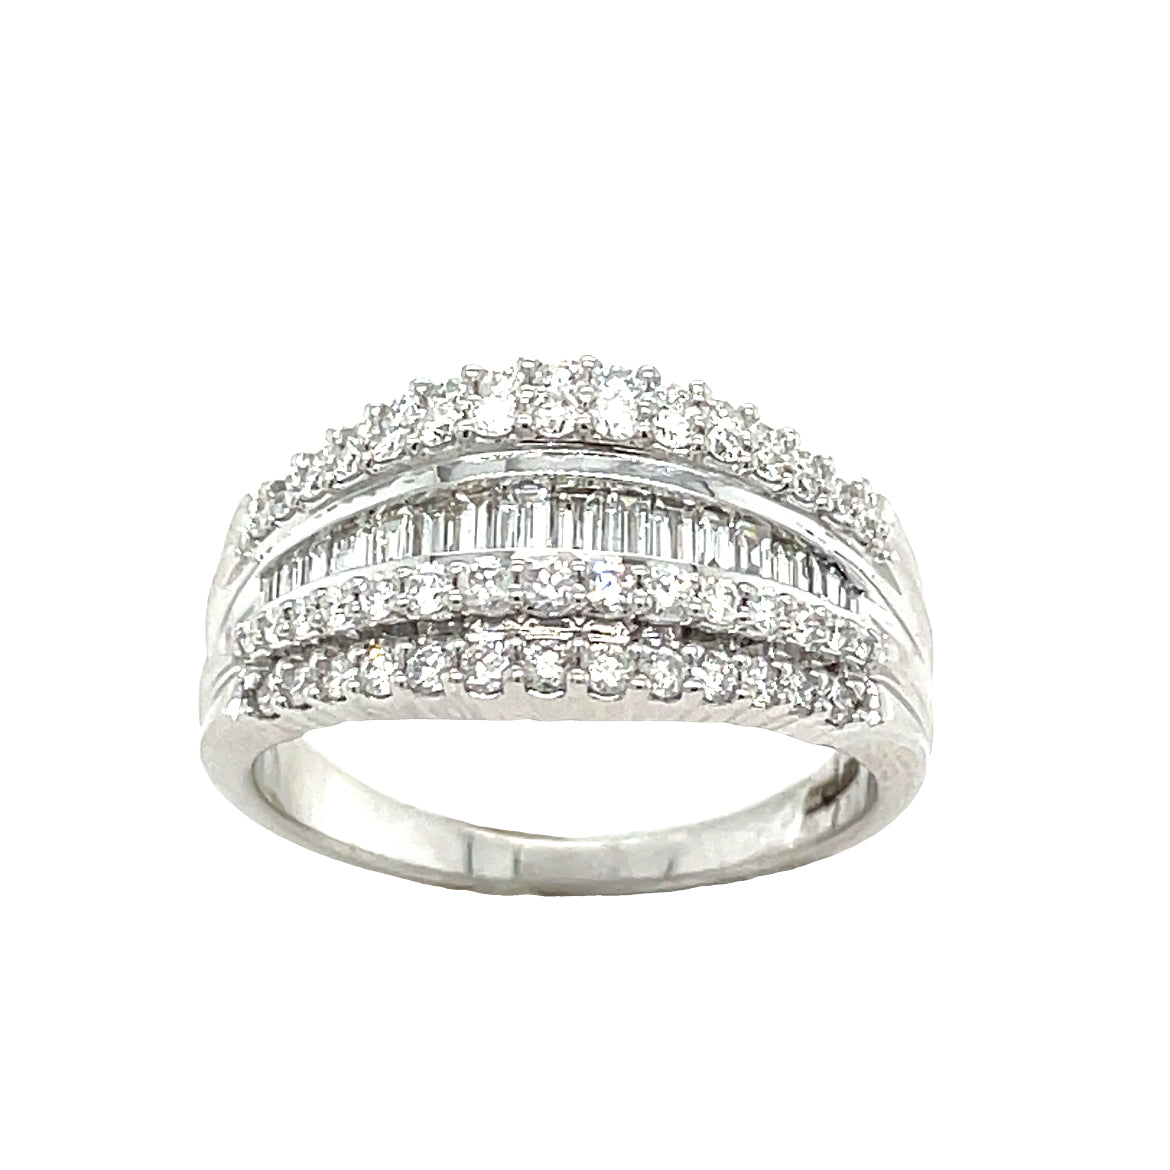 9ct White Gold 5 Row Baguette And Round Diamond Eternity Ring